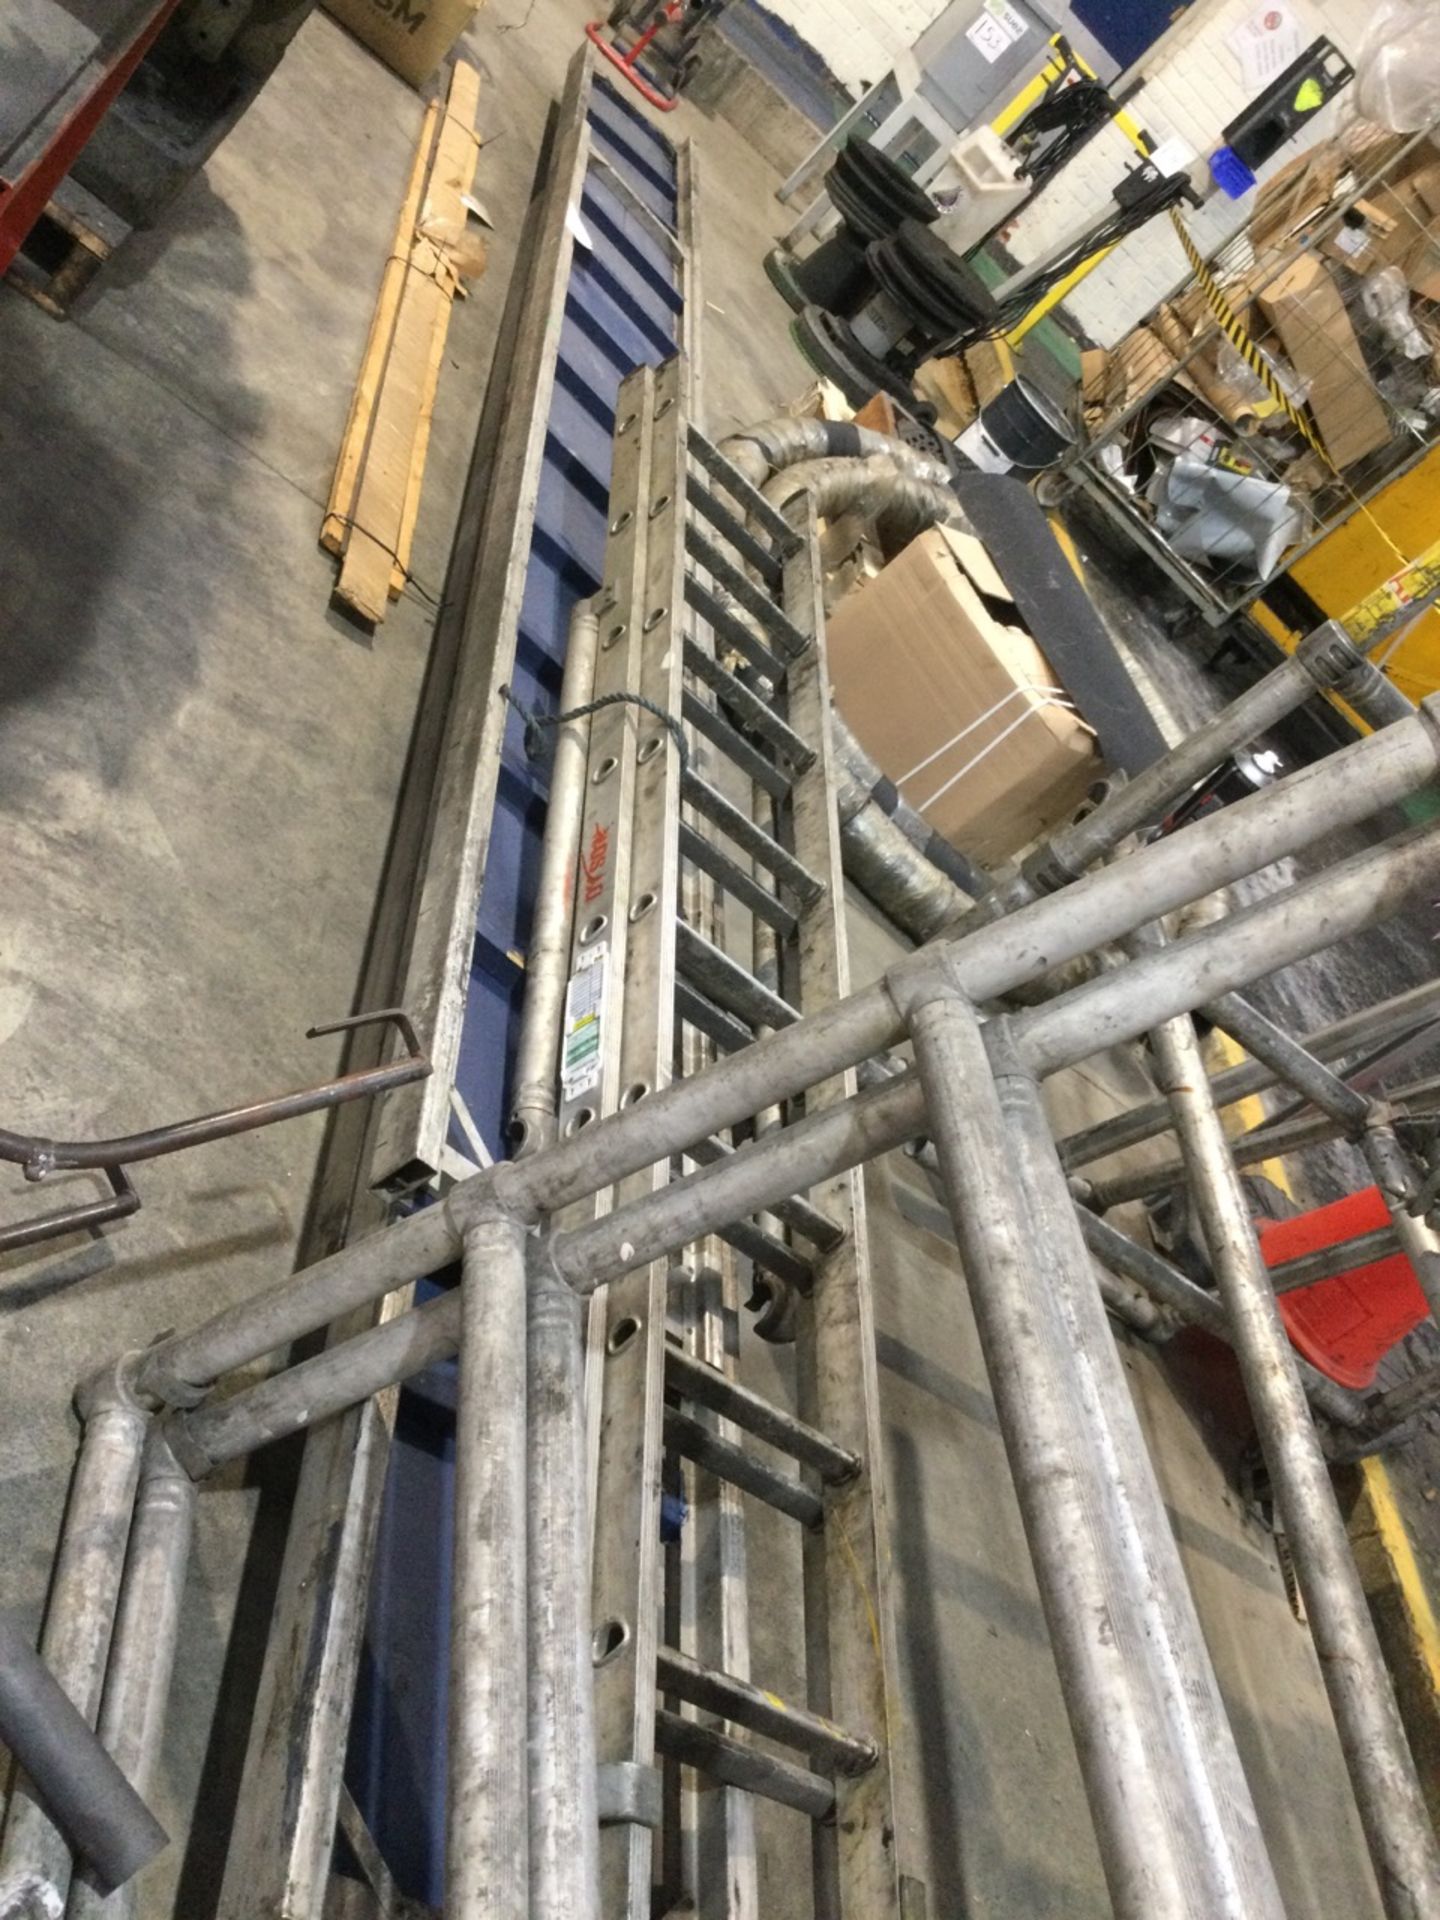 1 Instant Span, Access Platform Scaffolding, With - Image 2 of 2